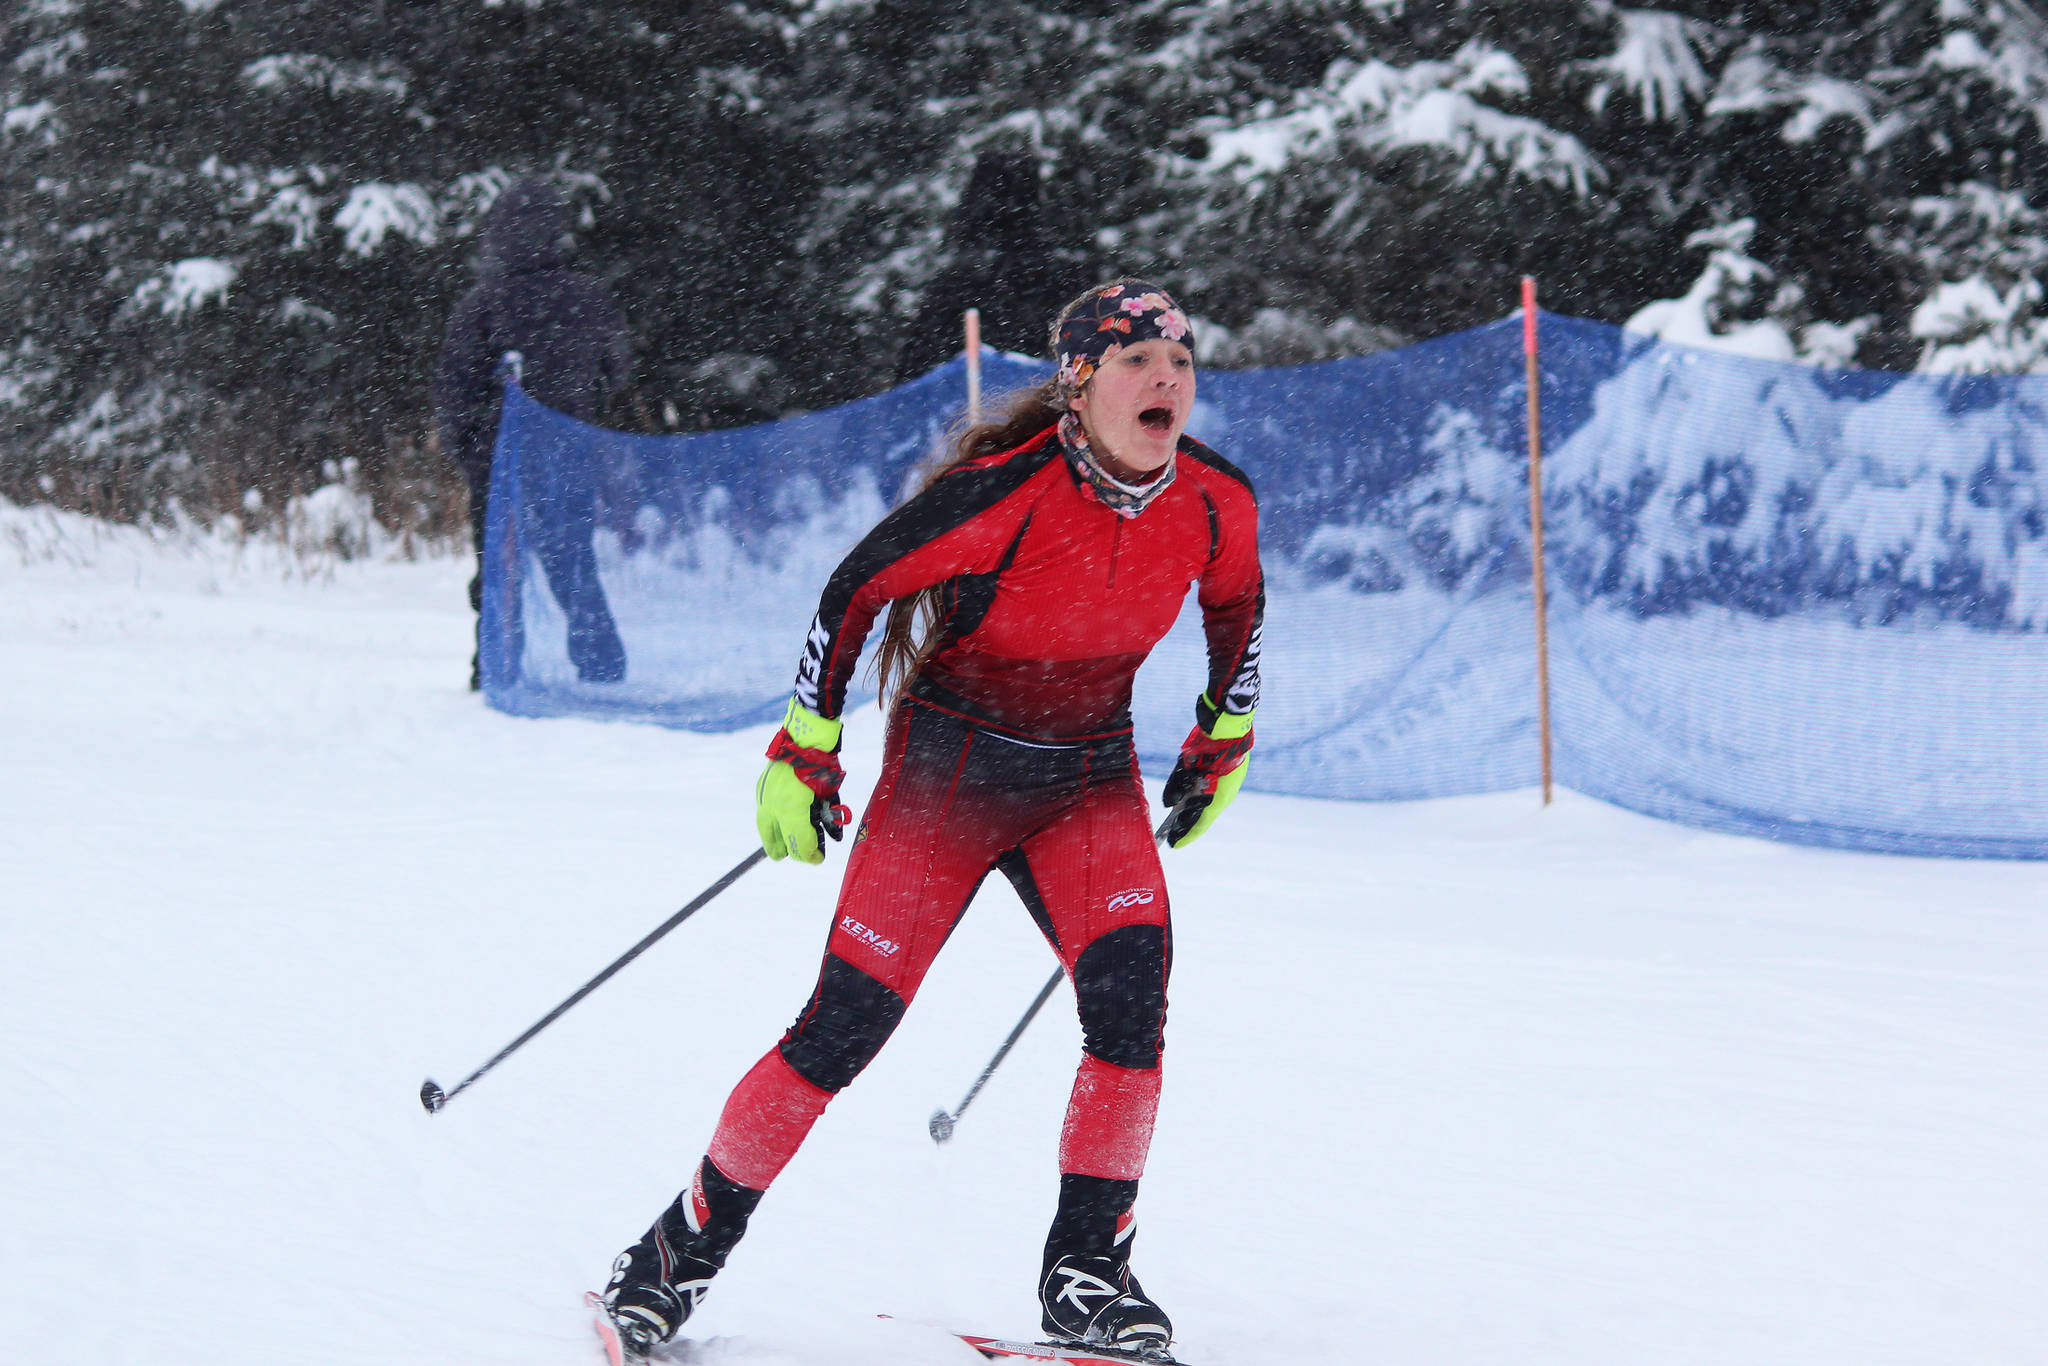 Kenai senior Maria Salzetti approaches the finish line of the girls’ race during a Homer-hosted ski meet Friday, Dec. 14, 2018 at the Ohlson Mountain Trails near Homer, Alaska. Salzetti came in second for the varsity girls. (Photo by Megan Pacer/Homer News)